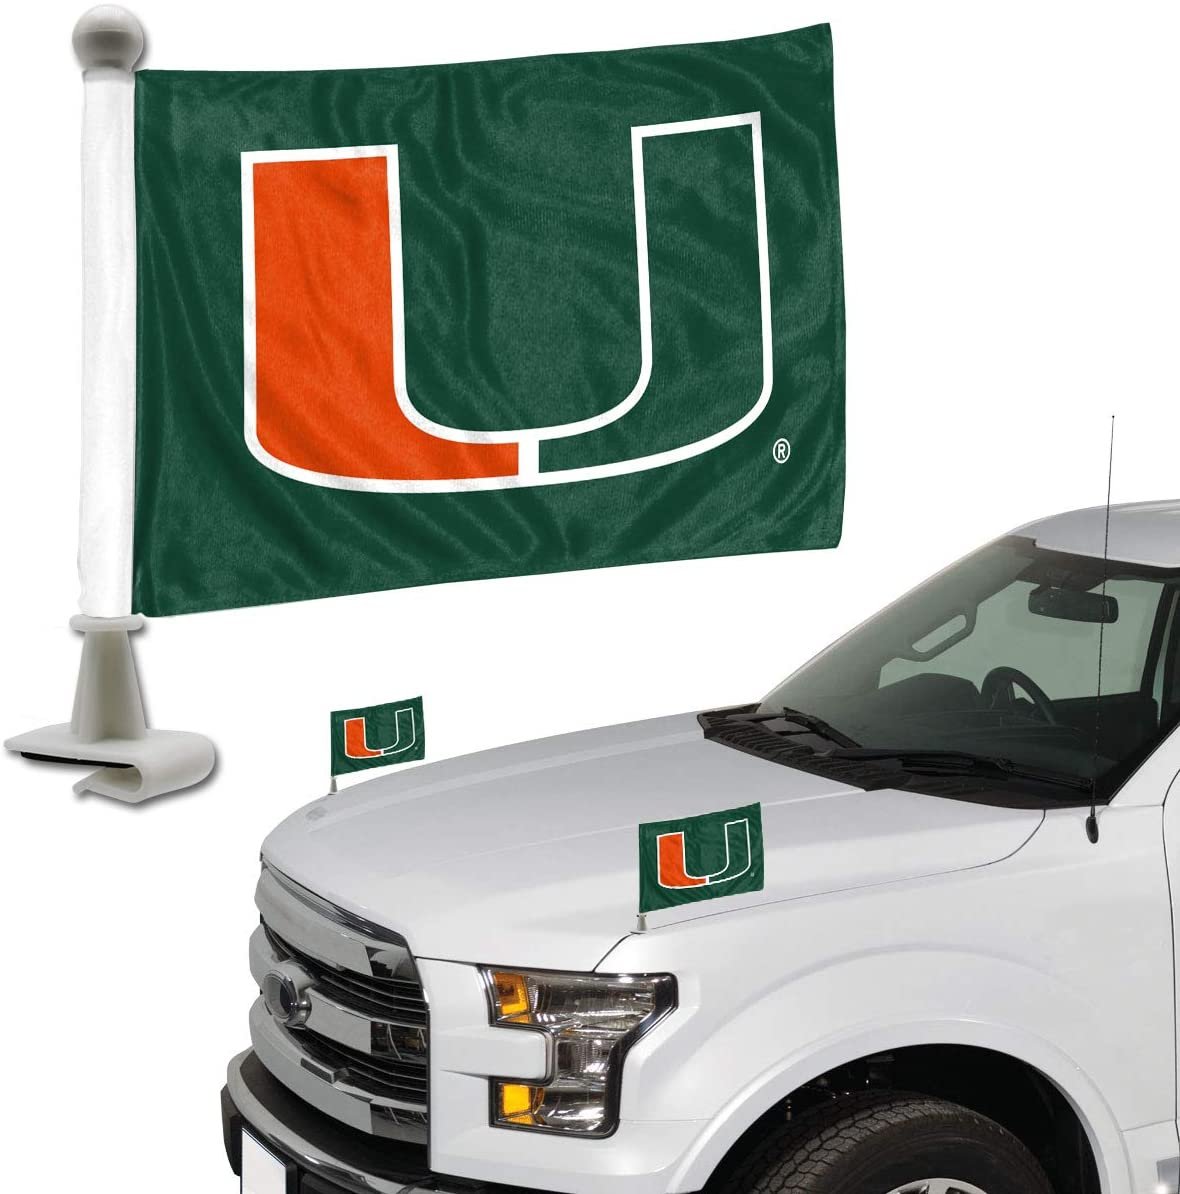 FANMATS 61913 Miami Hurricanes Ambassador Car Flags - 2 Pack Mini Auto Flags, 4in X 6in, Perfect for Hood or Trunk